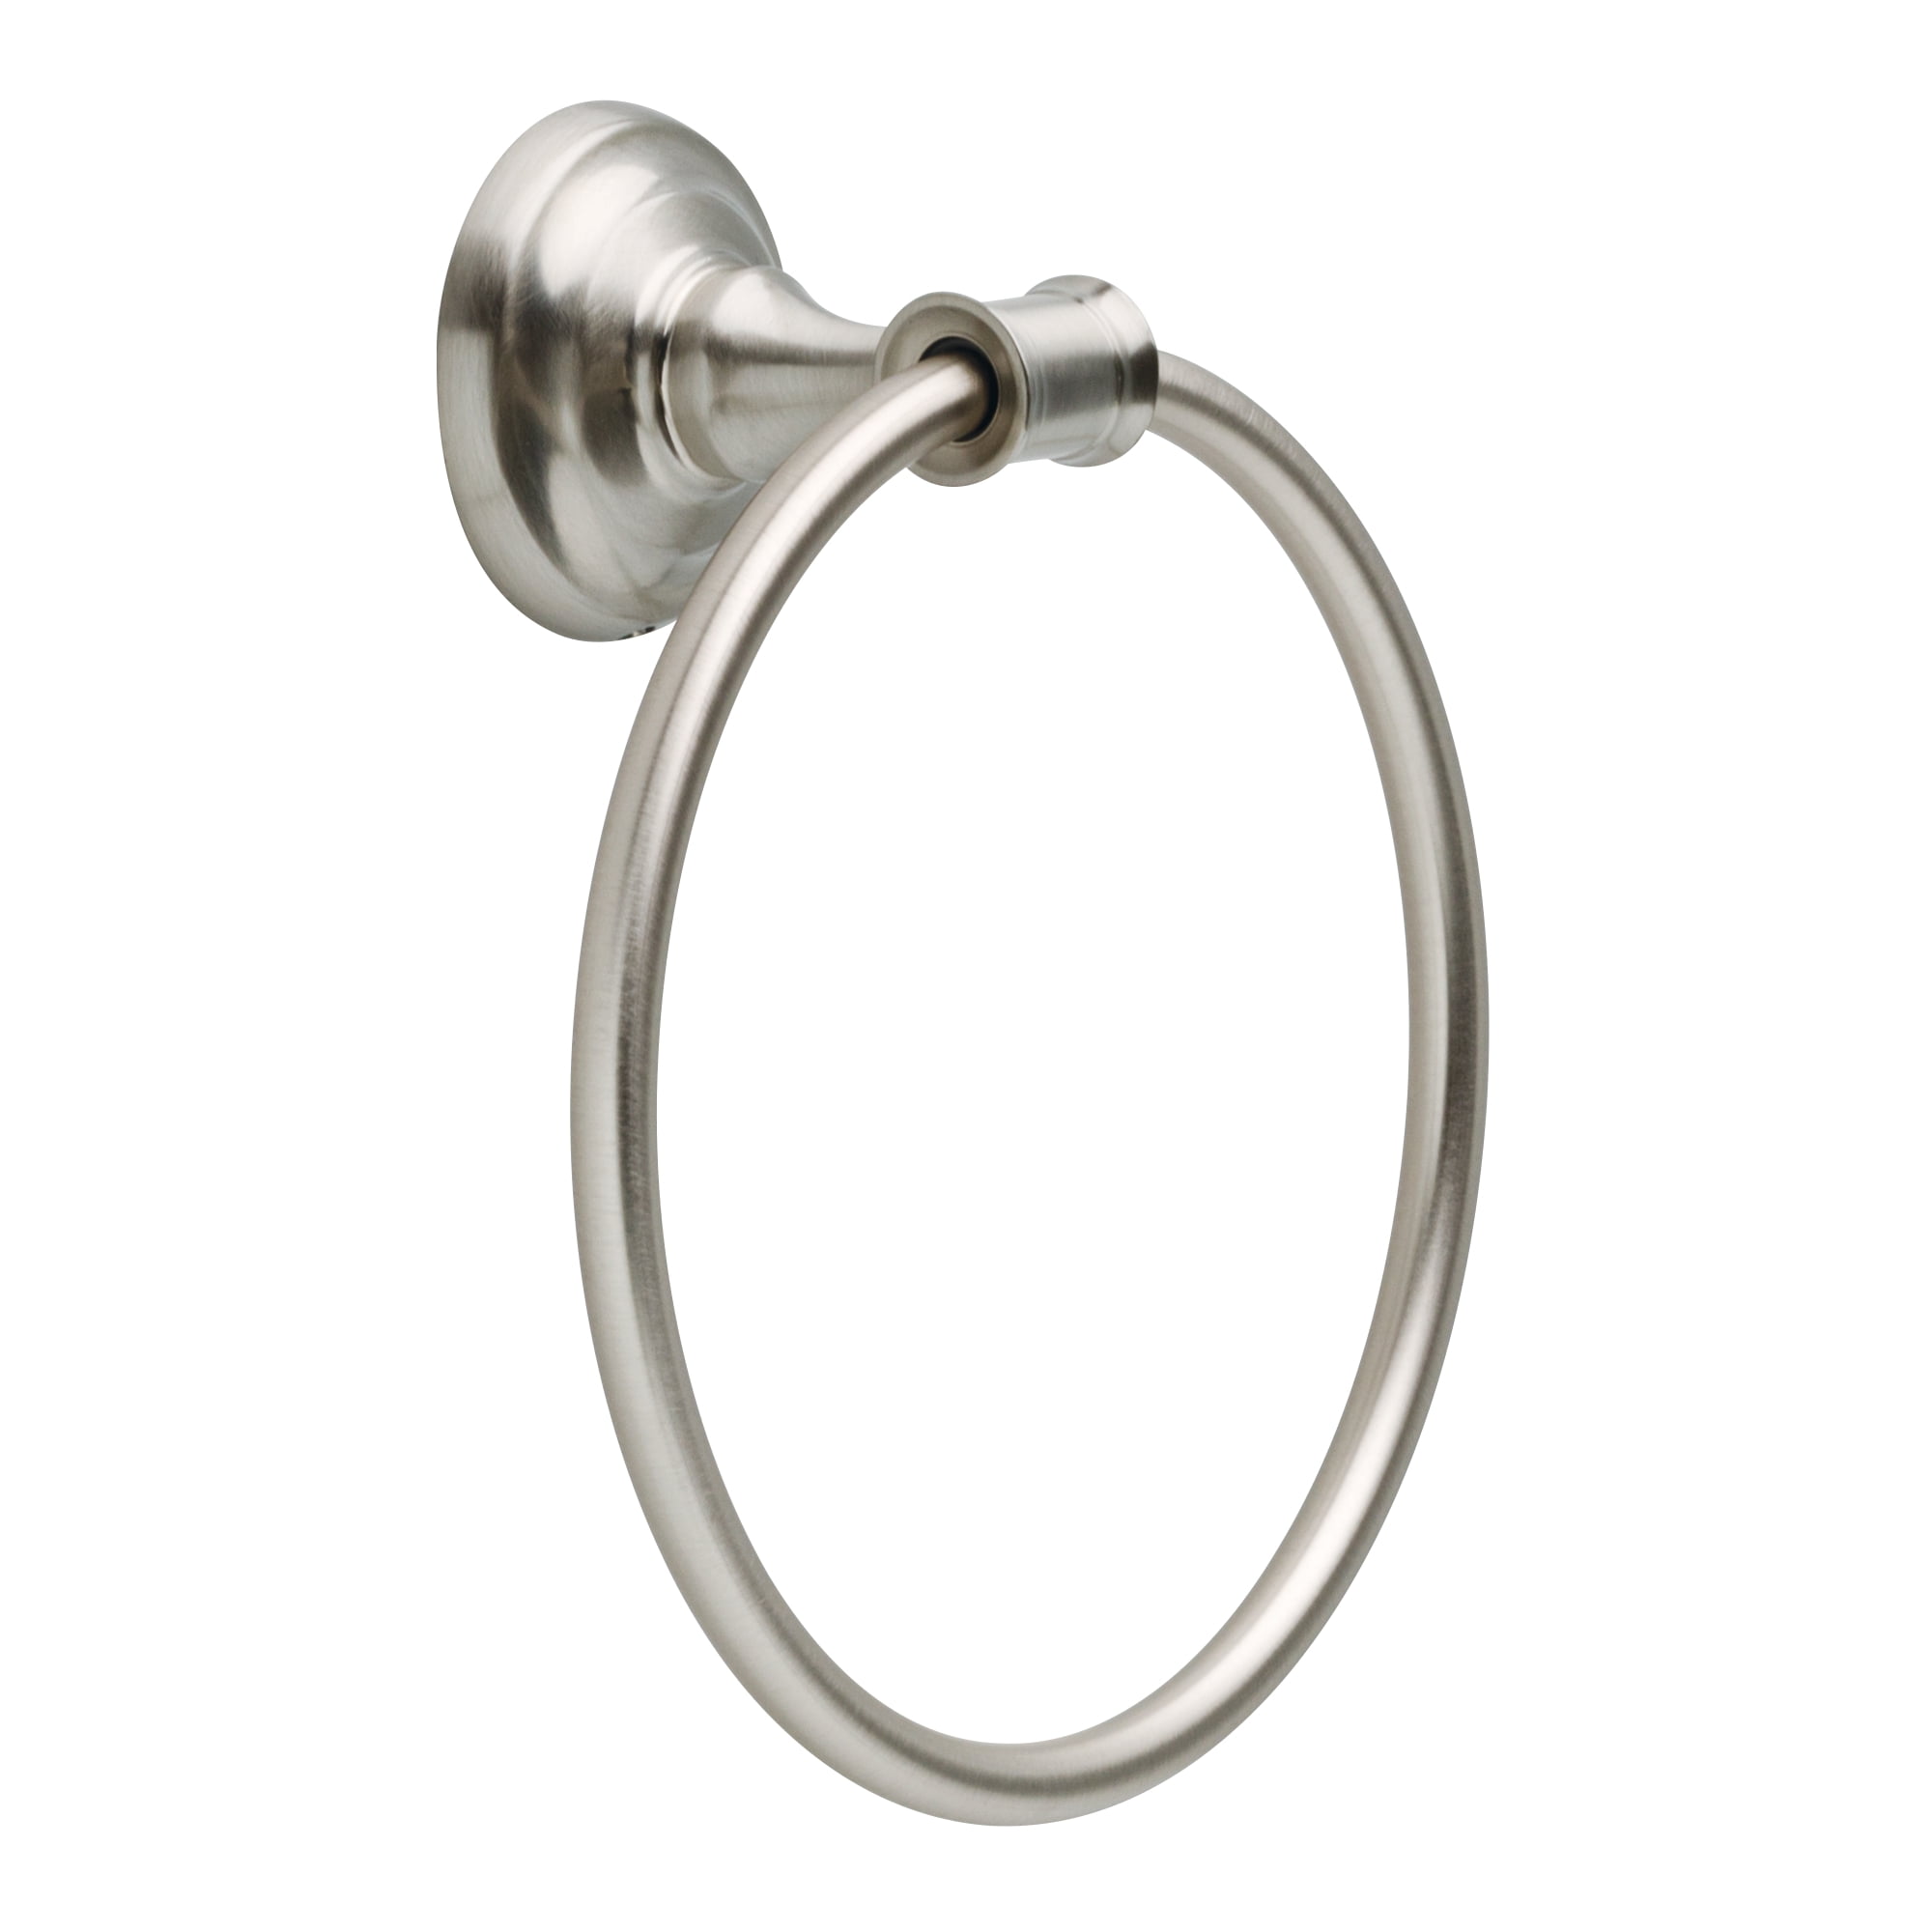 Open-Ended Wall Mount Polished Chrome Metal Hand Towel Ring Holder 38lb Capacity